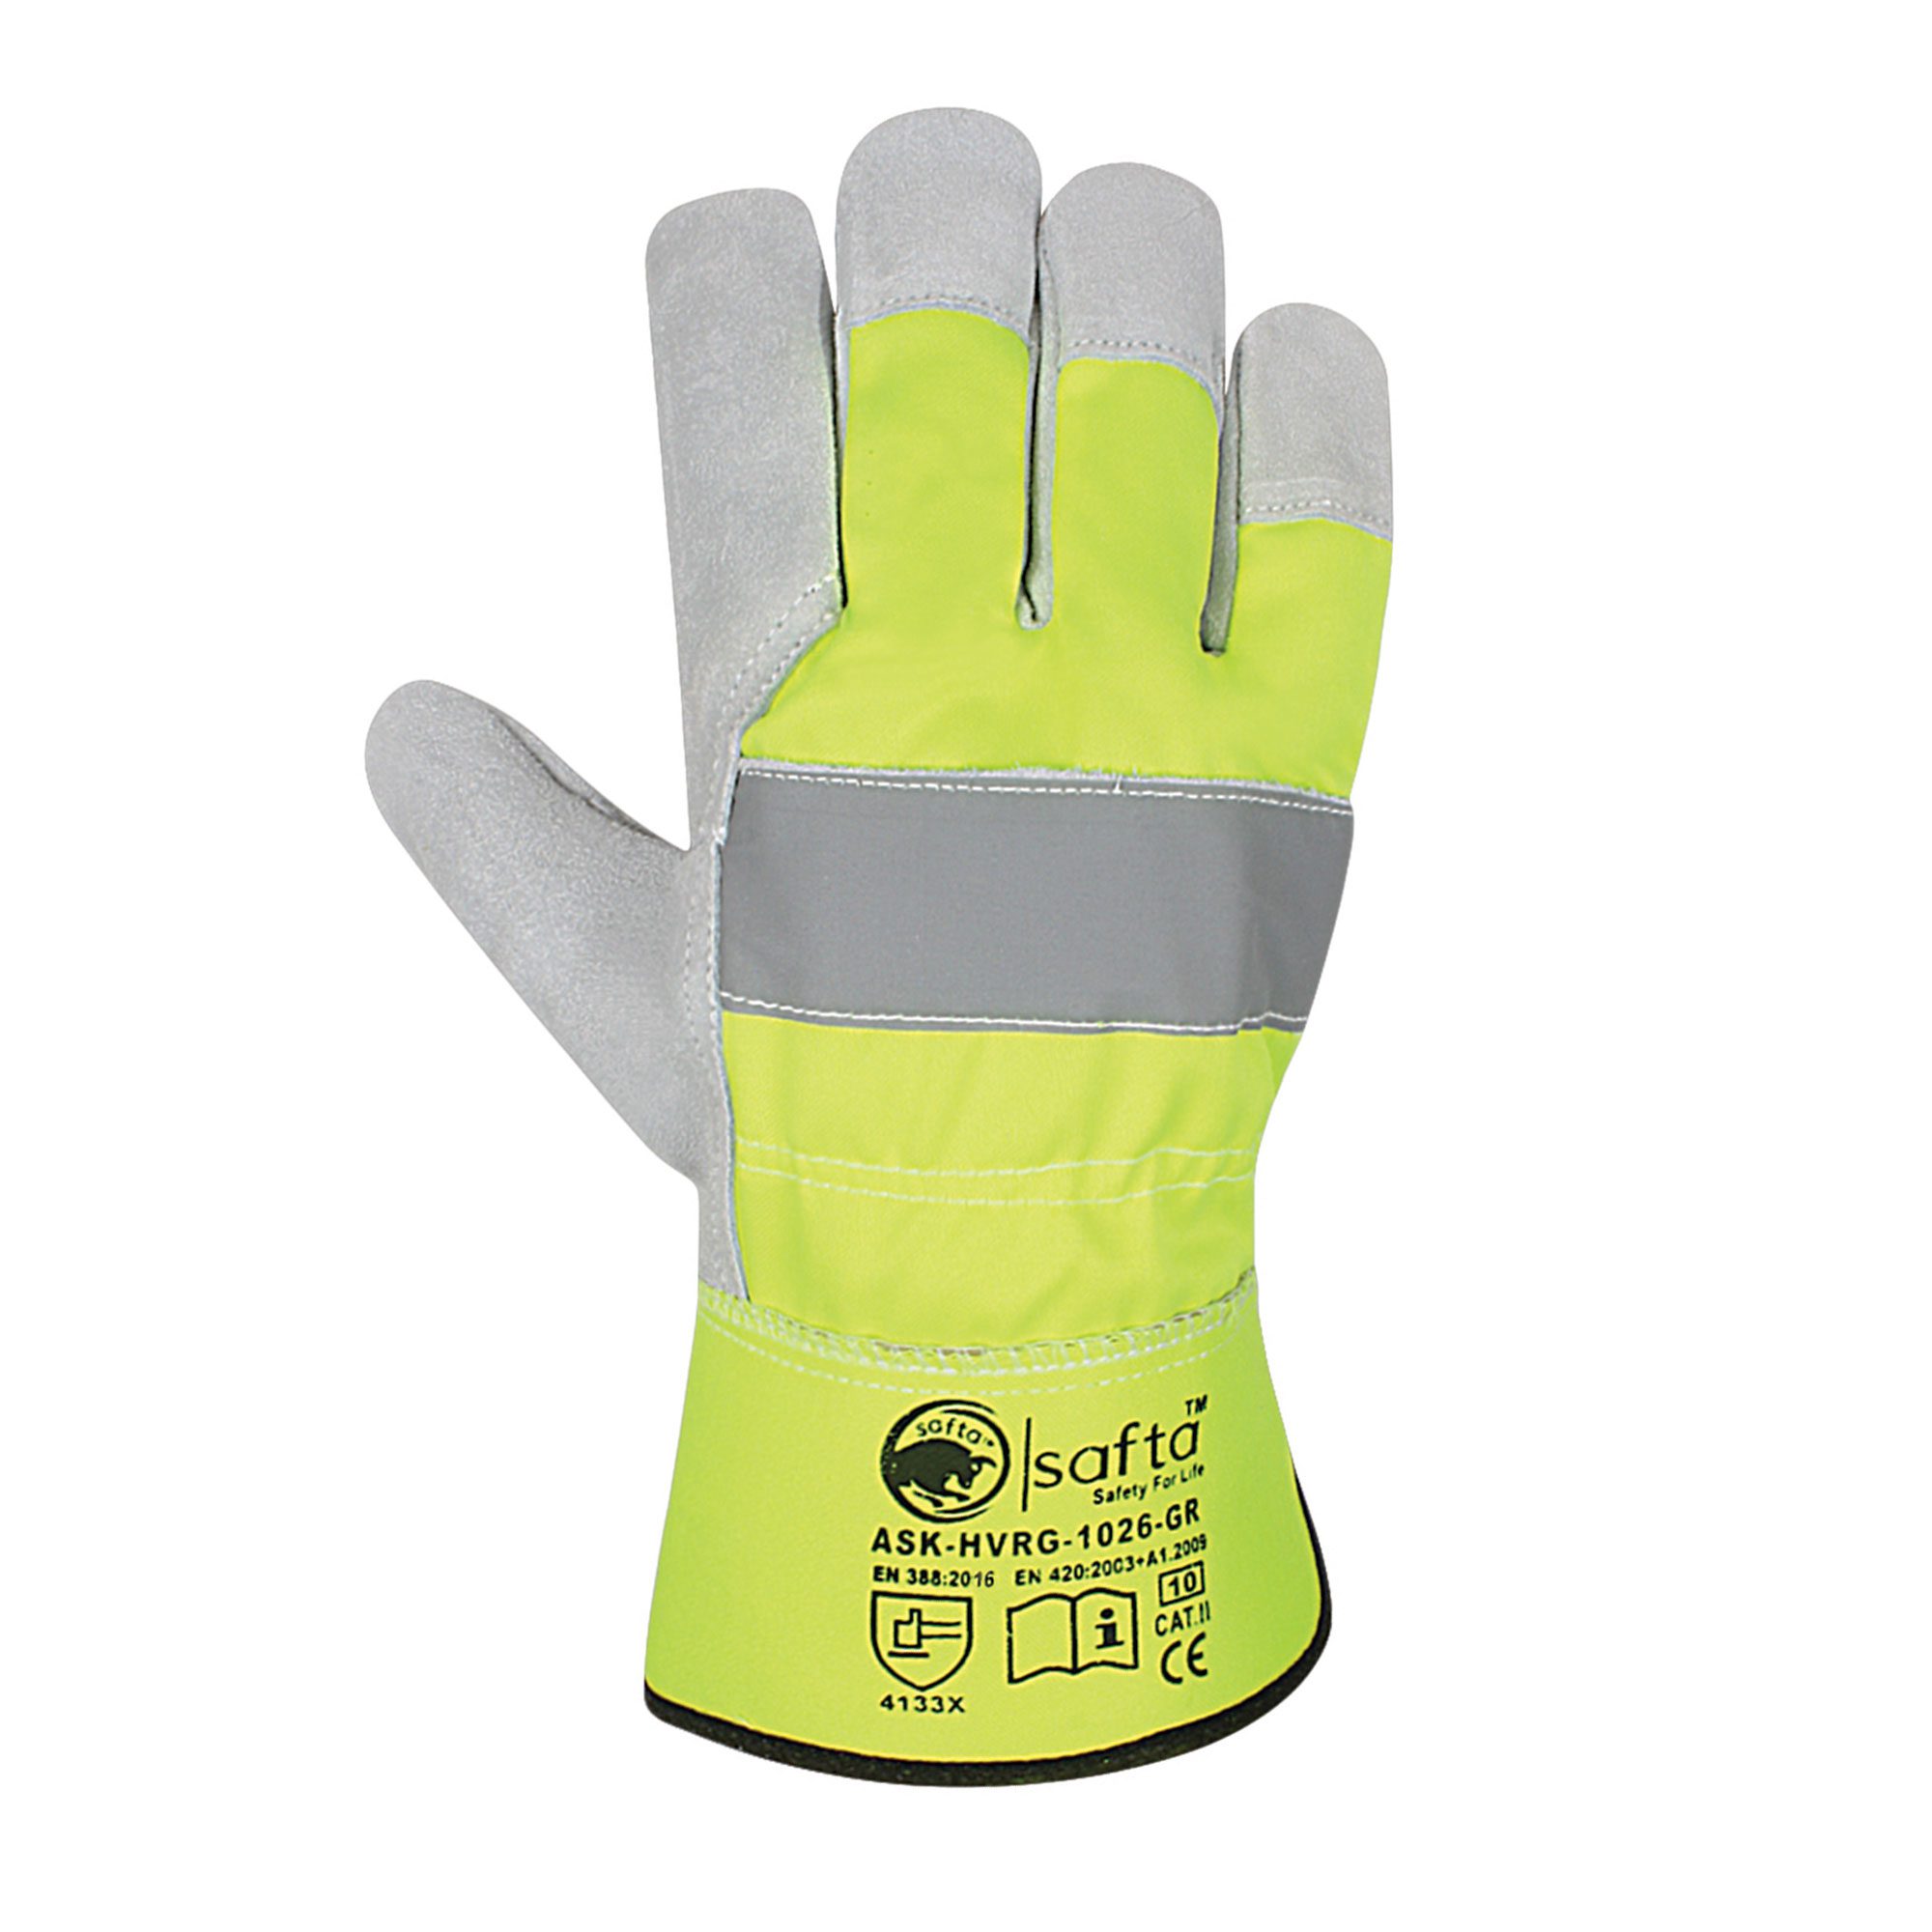 6 Sets of Large Industrial Gloves High Visibility Reflective PPE Fingerless for sale online 